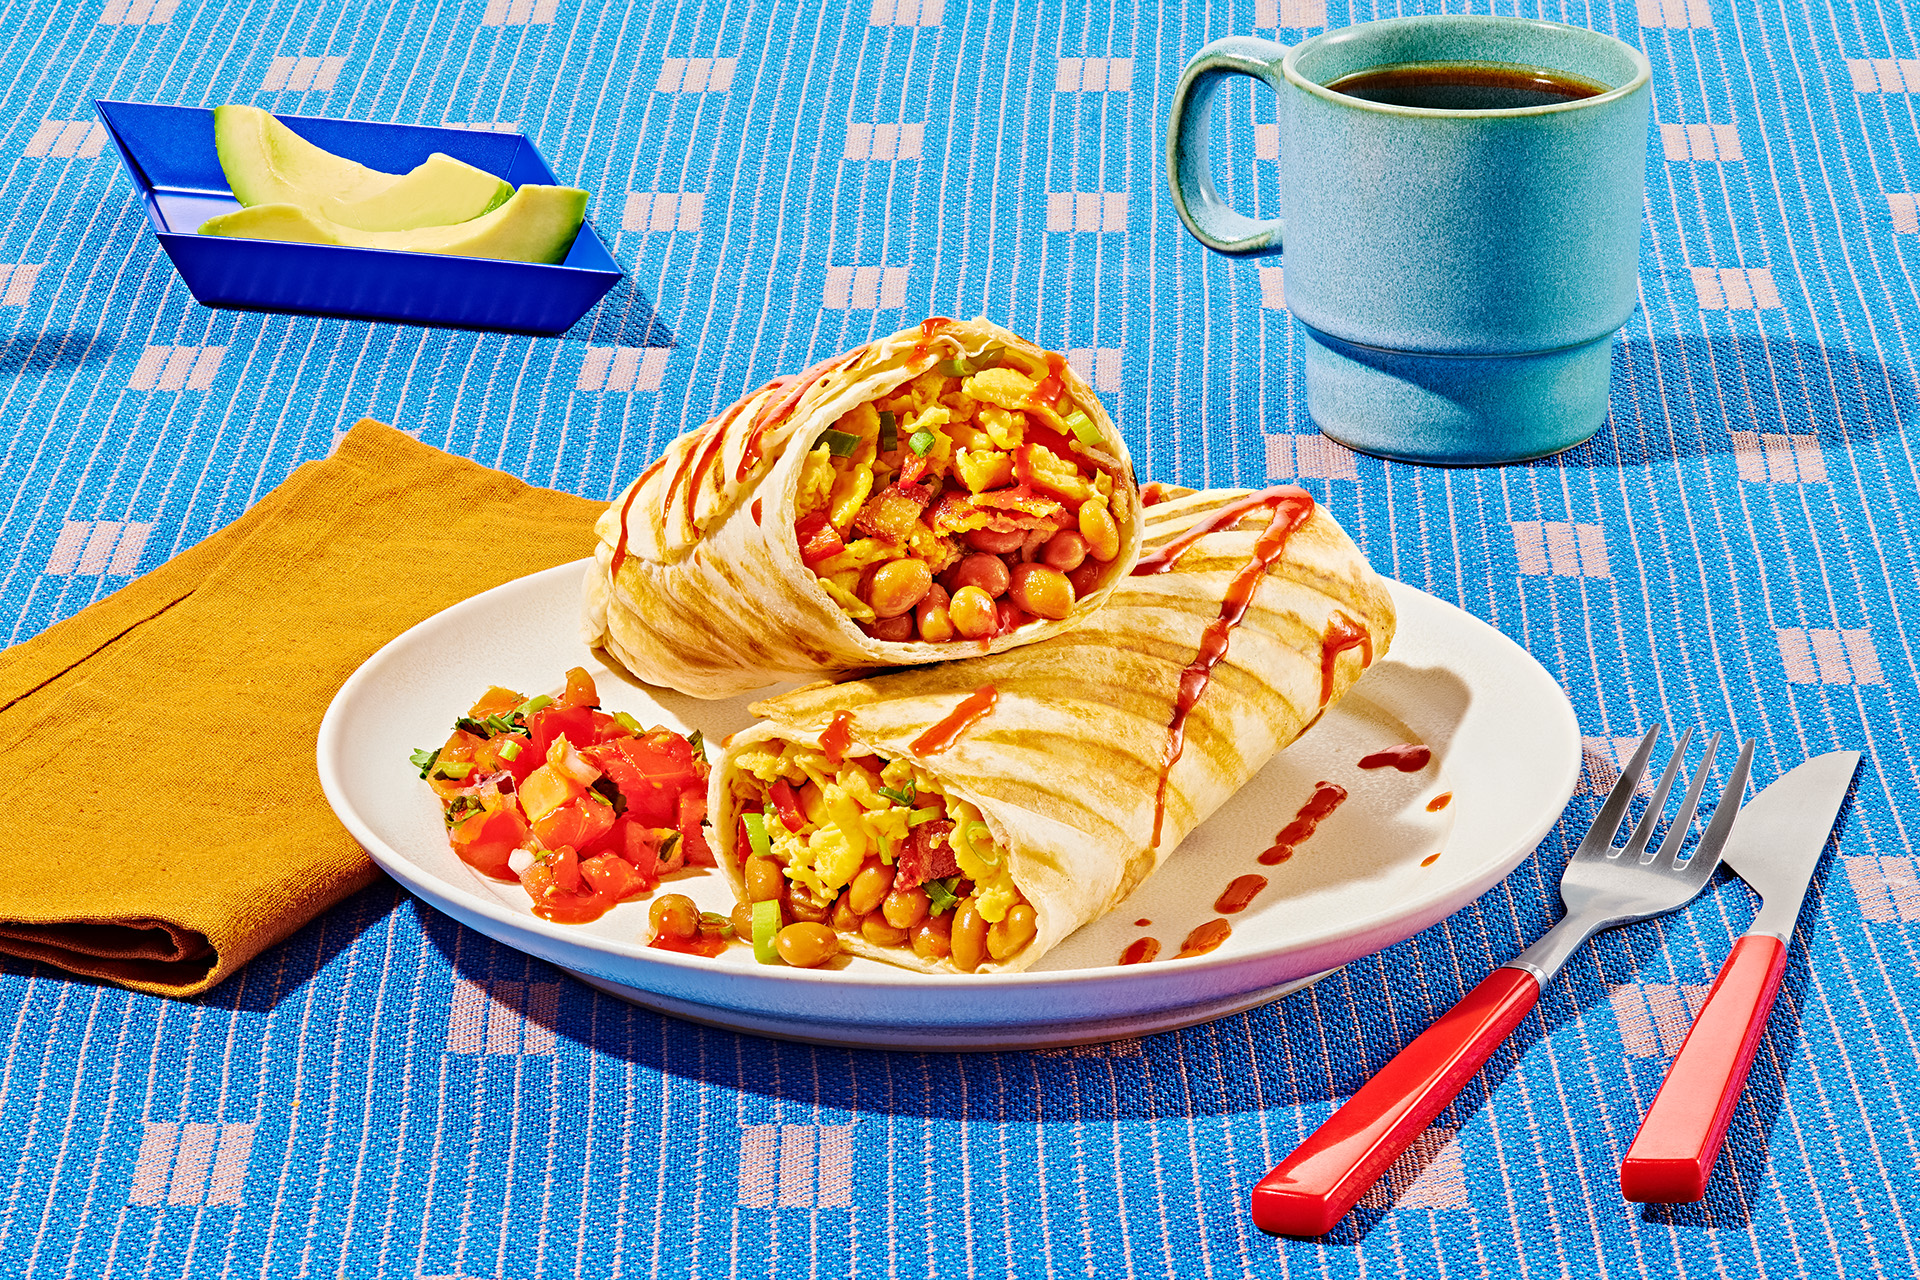 Grilled egg and baked bean breakfast burritos with bacon and tomato salsa on a white plate on a blue tablecoth